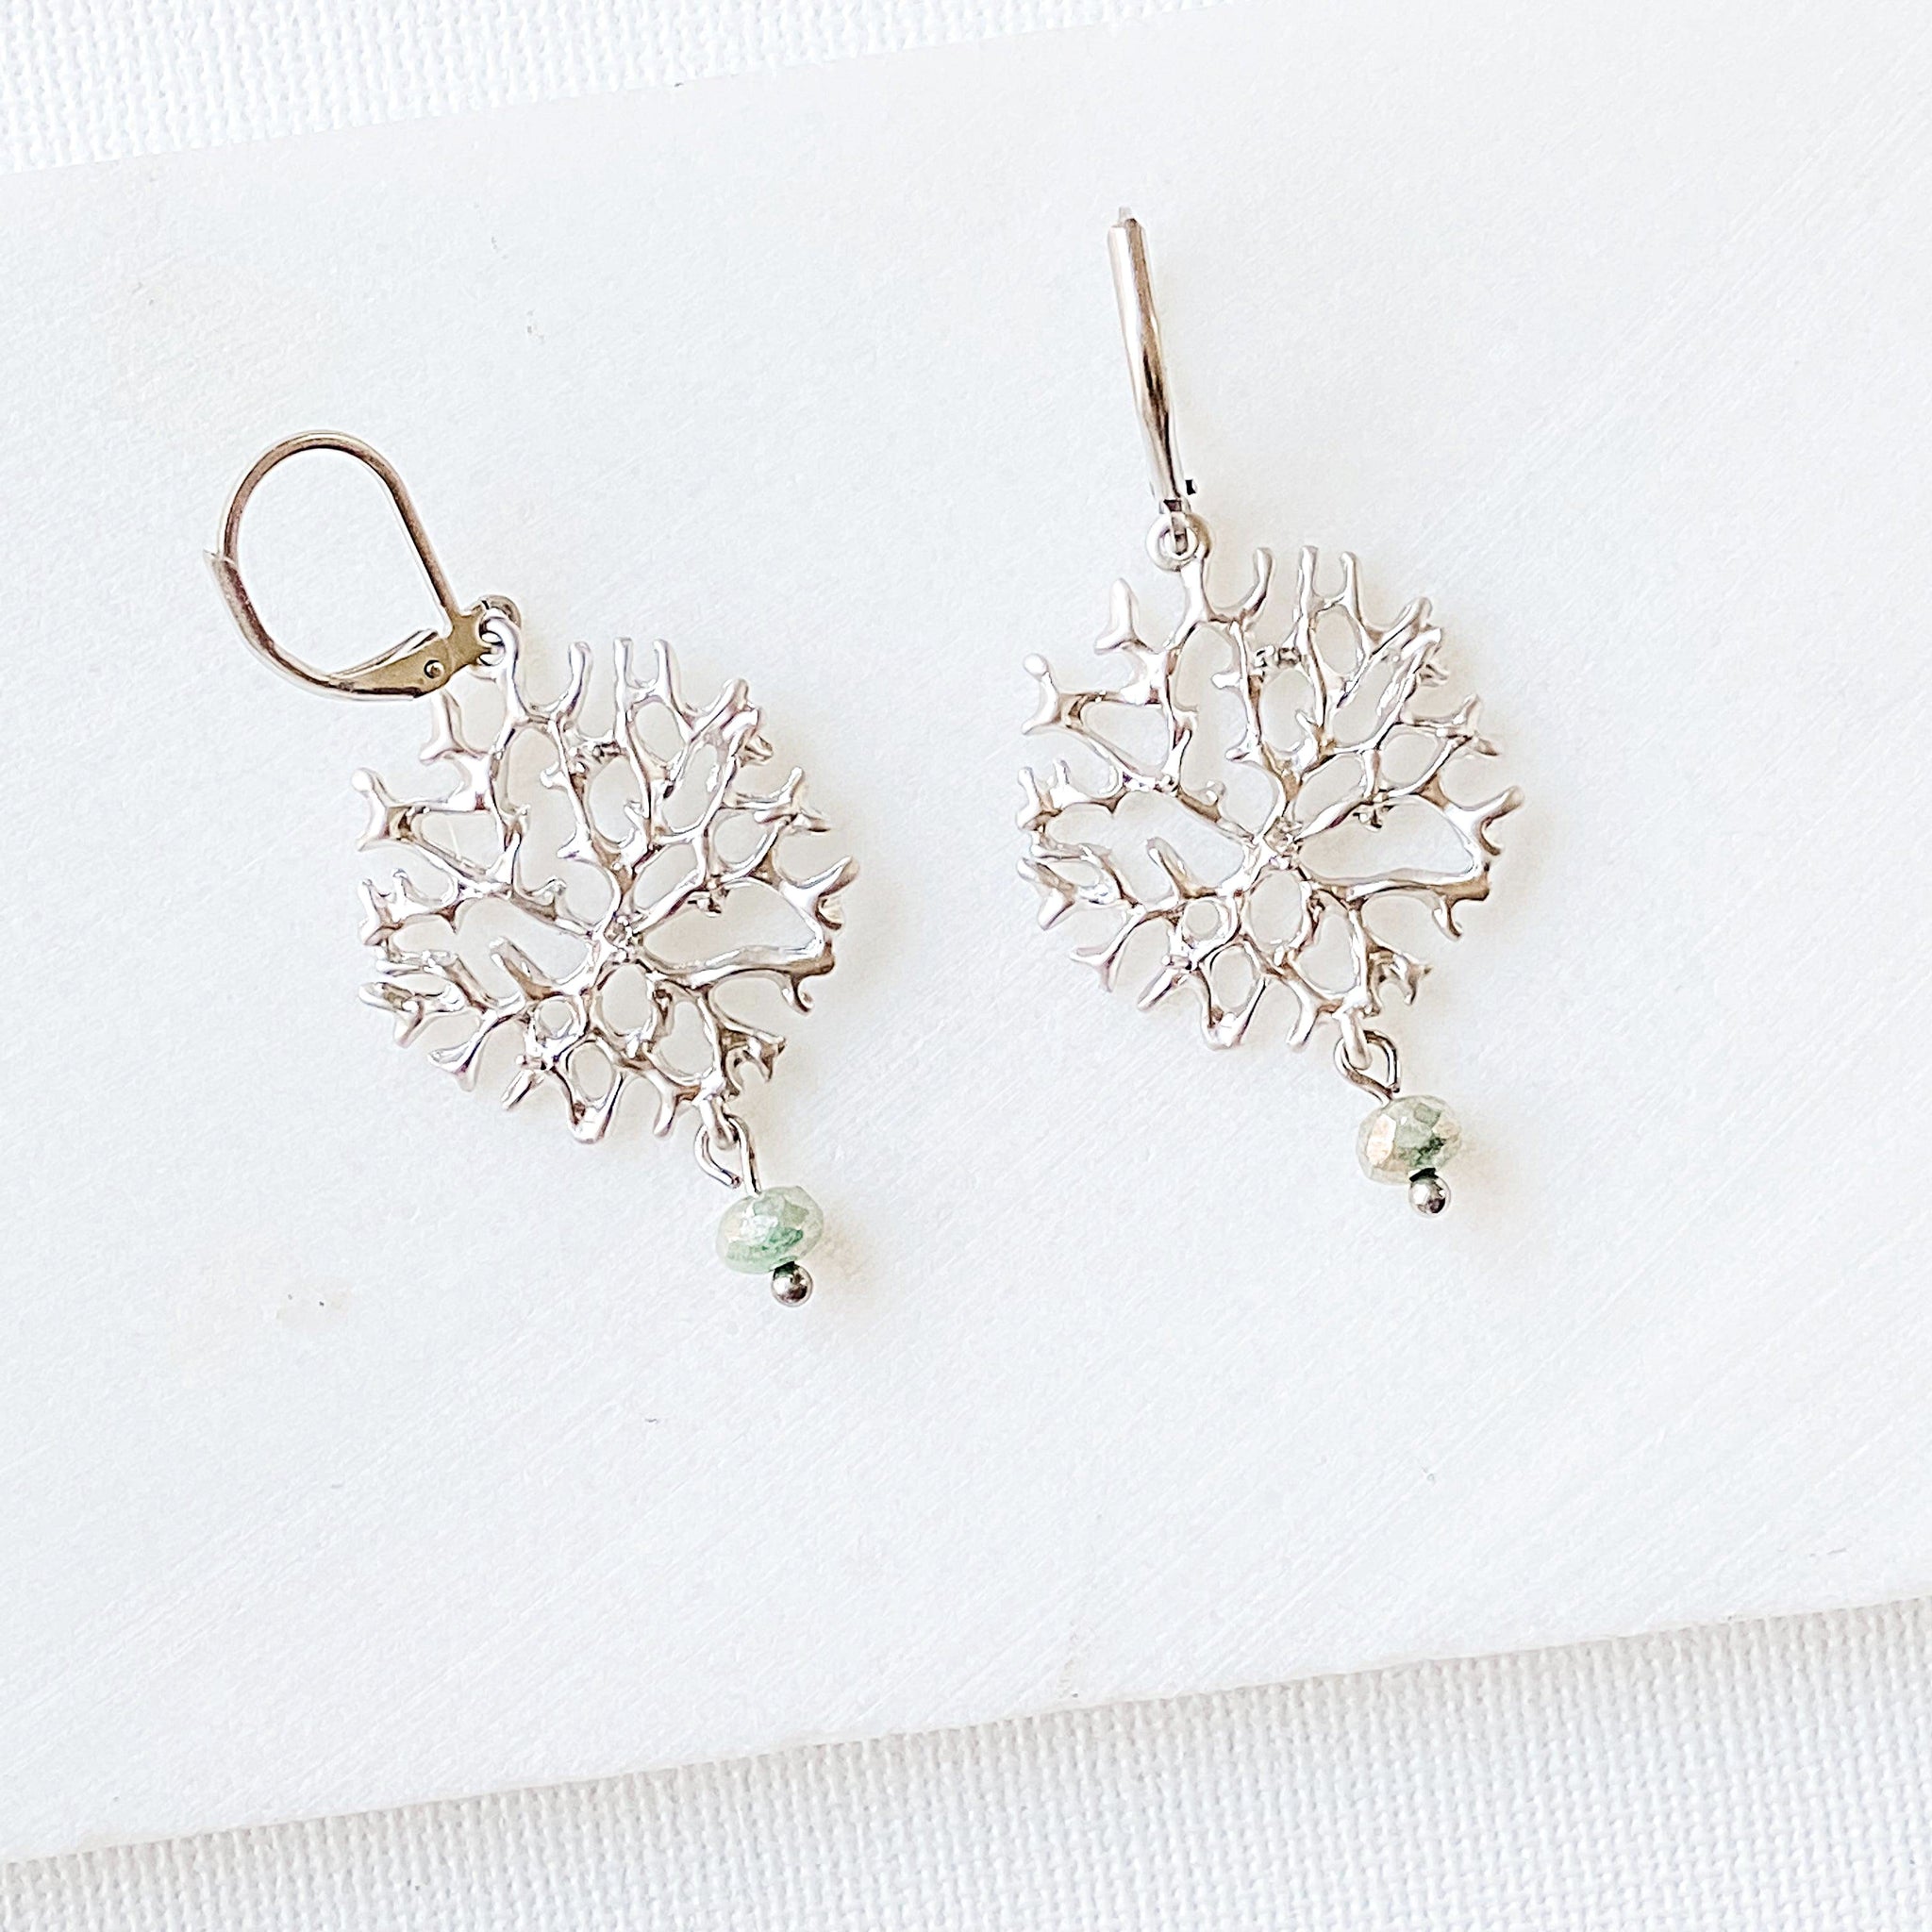 Rhodium Plated Earrings with Surgical Steel Ear Wire - Tree Branch Uni-T